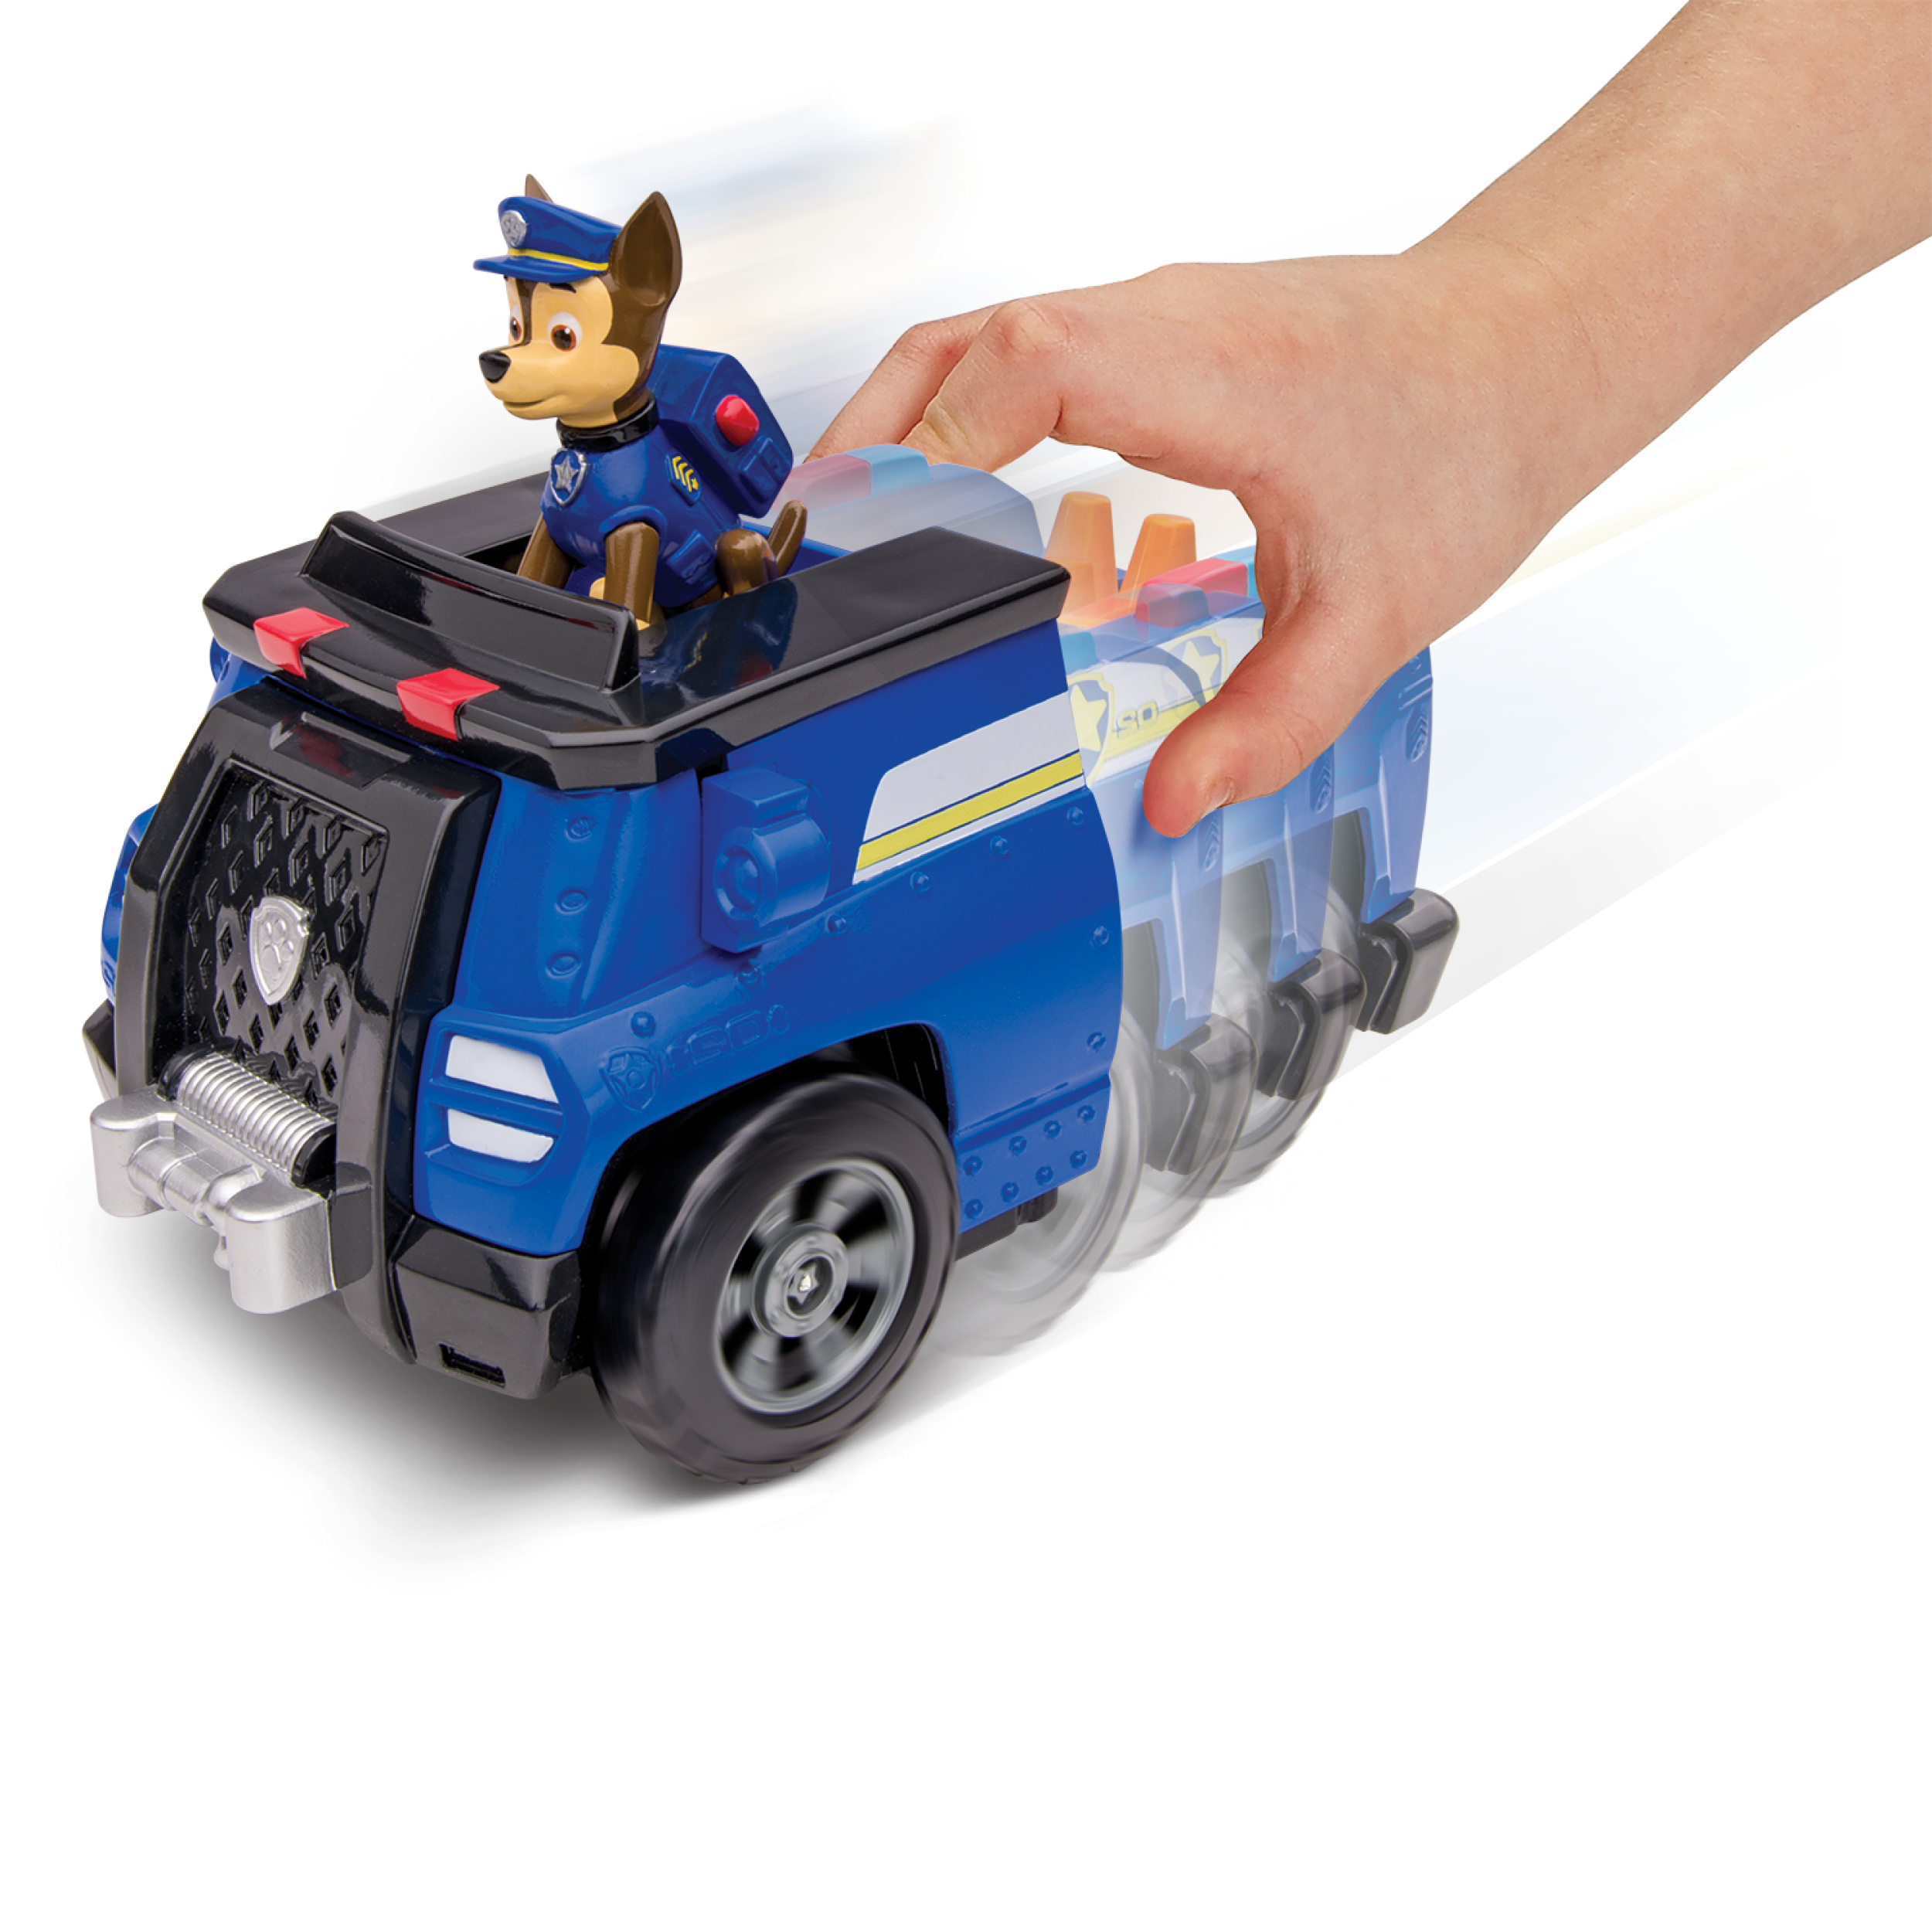 Paw Patrol On a Roll Chase, Figure and Vehicle with Sounds - image 3 of 5